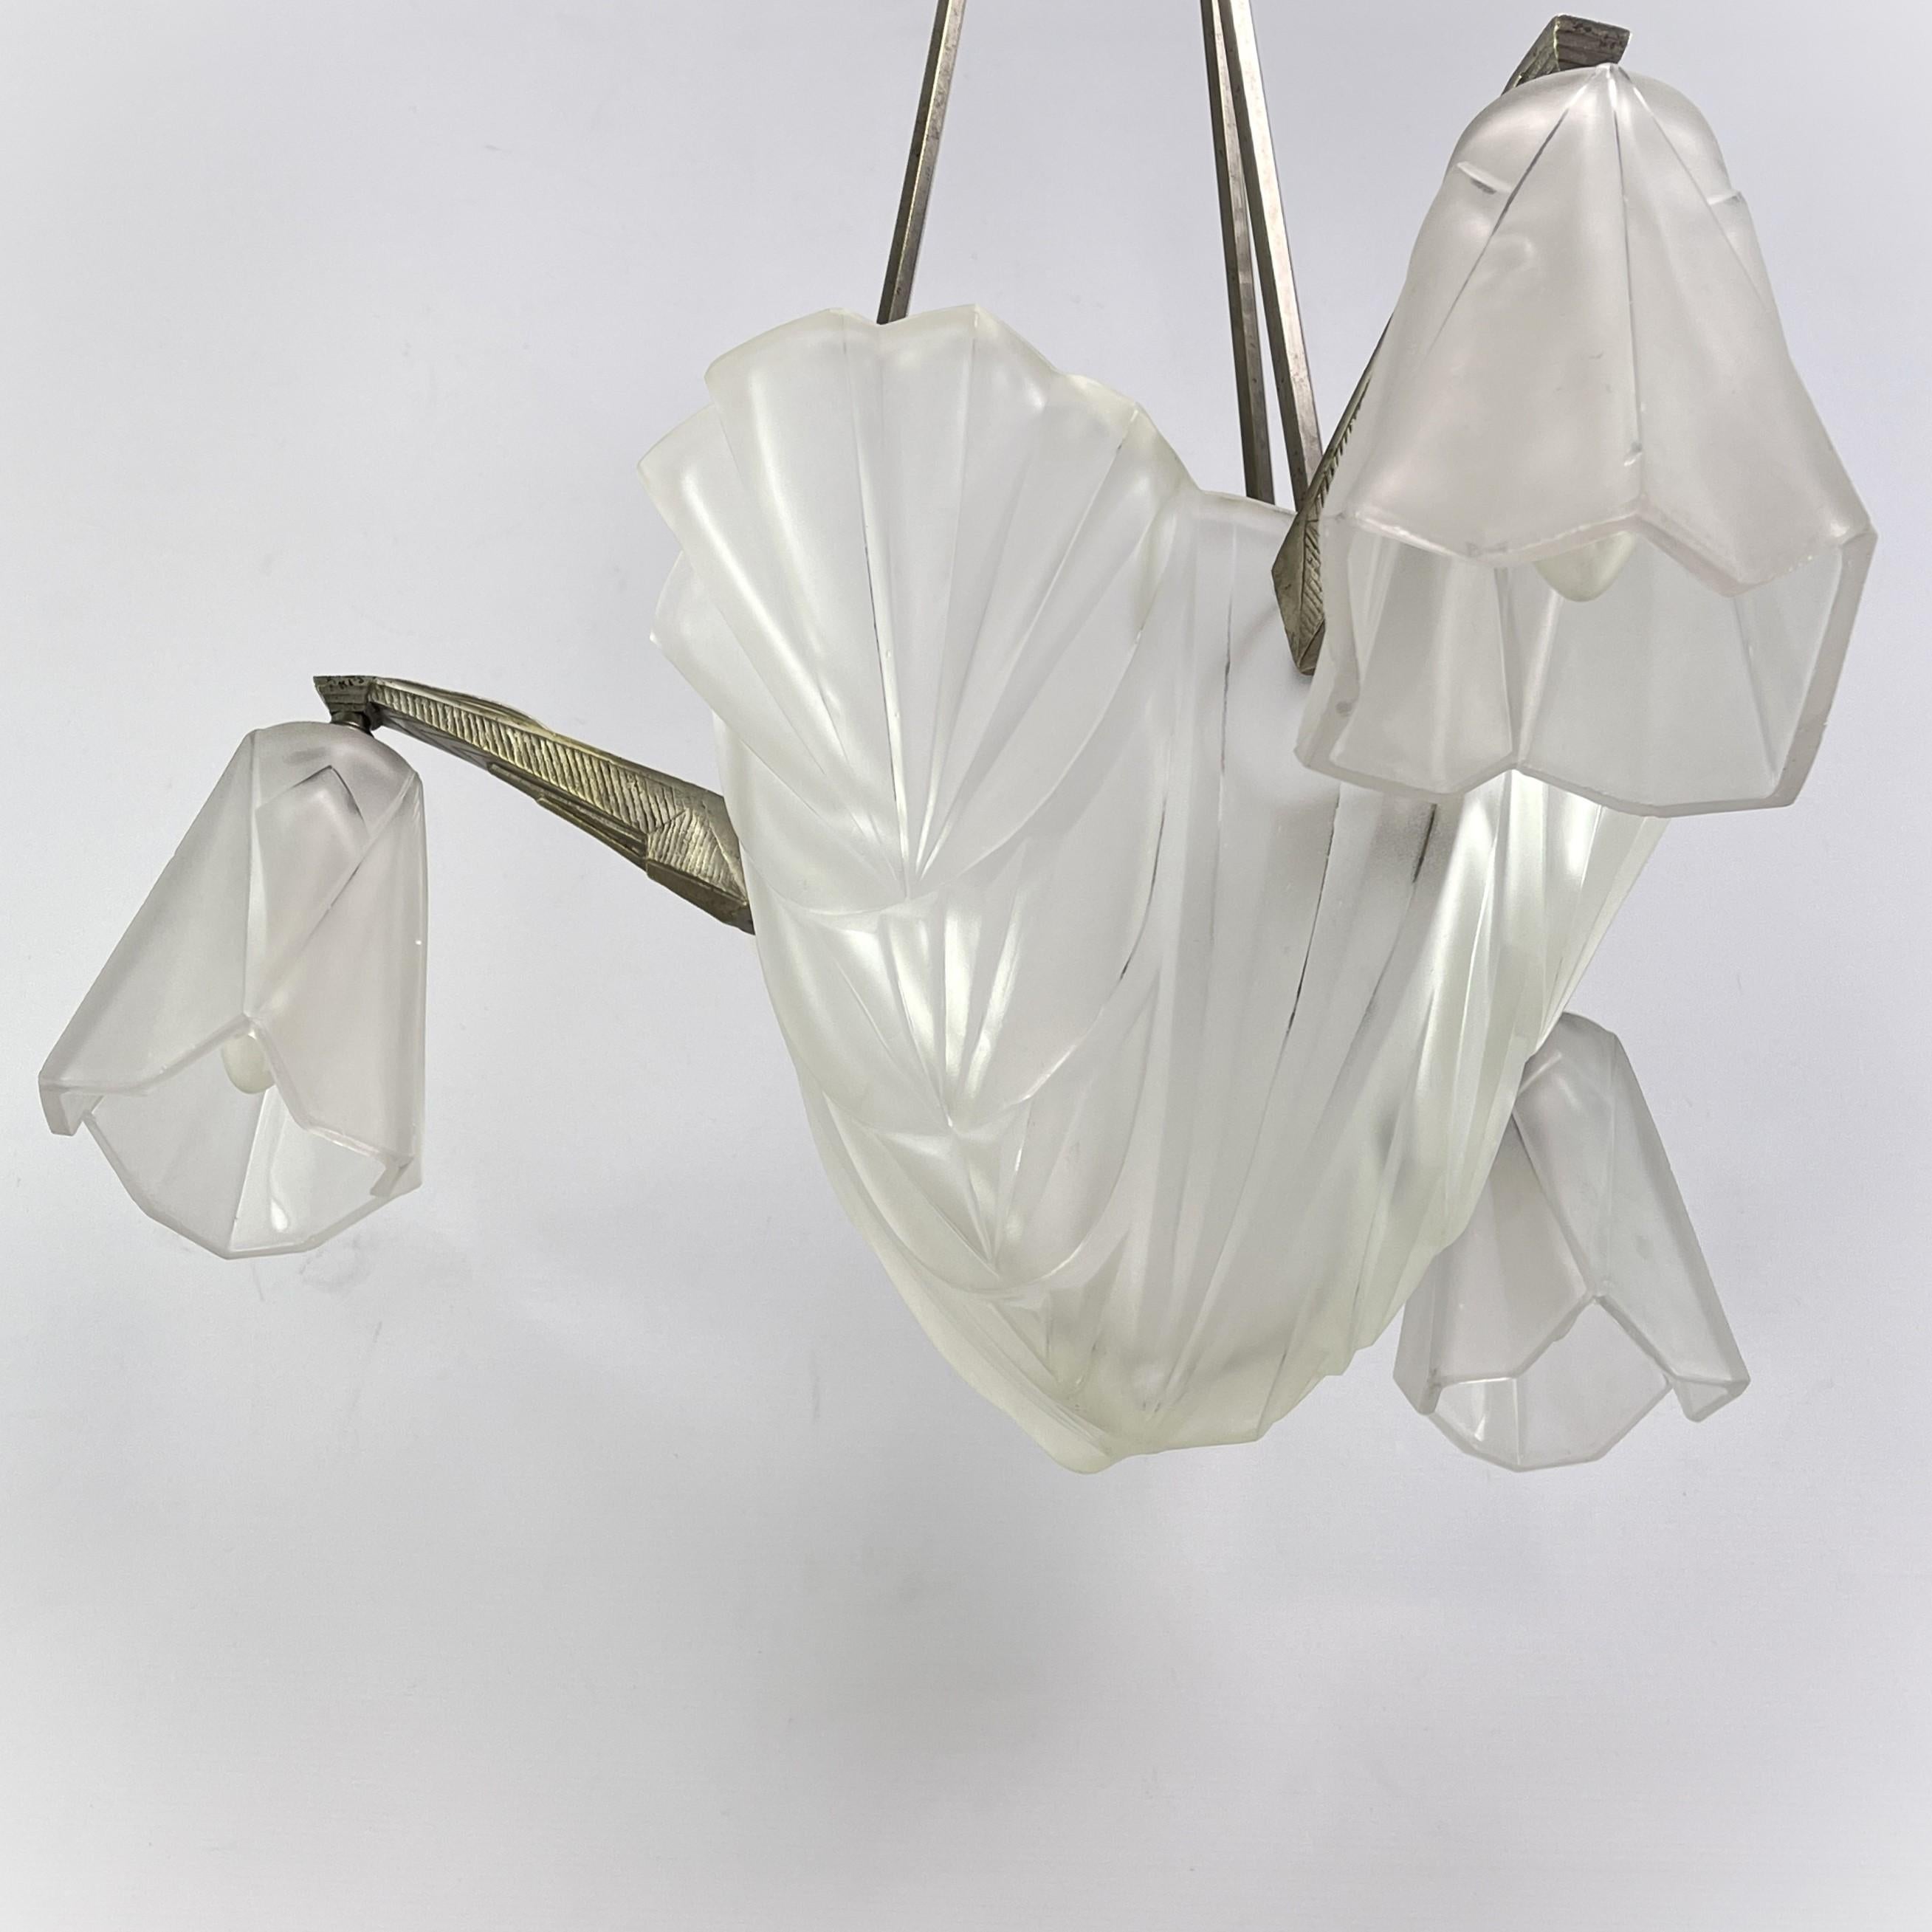 20th Century Art Deco Chandelier Hanging Lamp by Dégue, 1930s